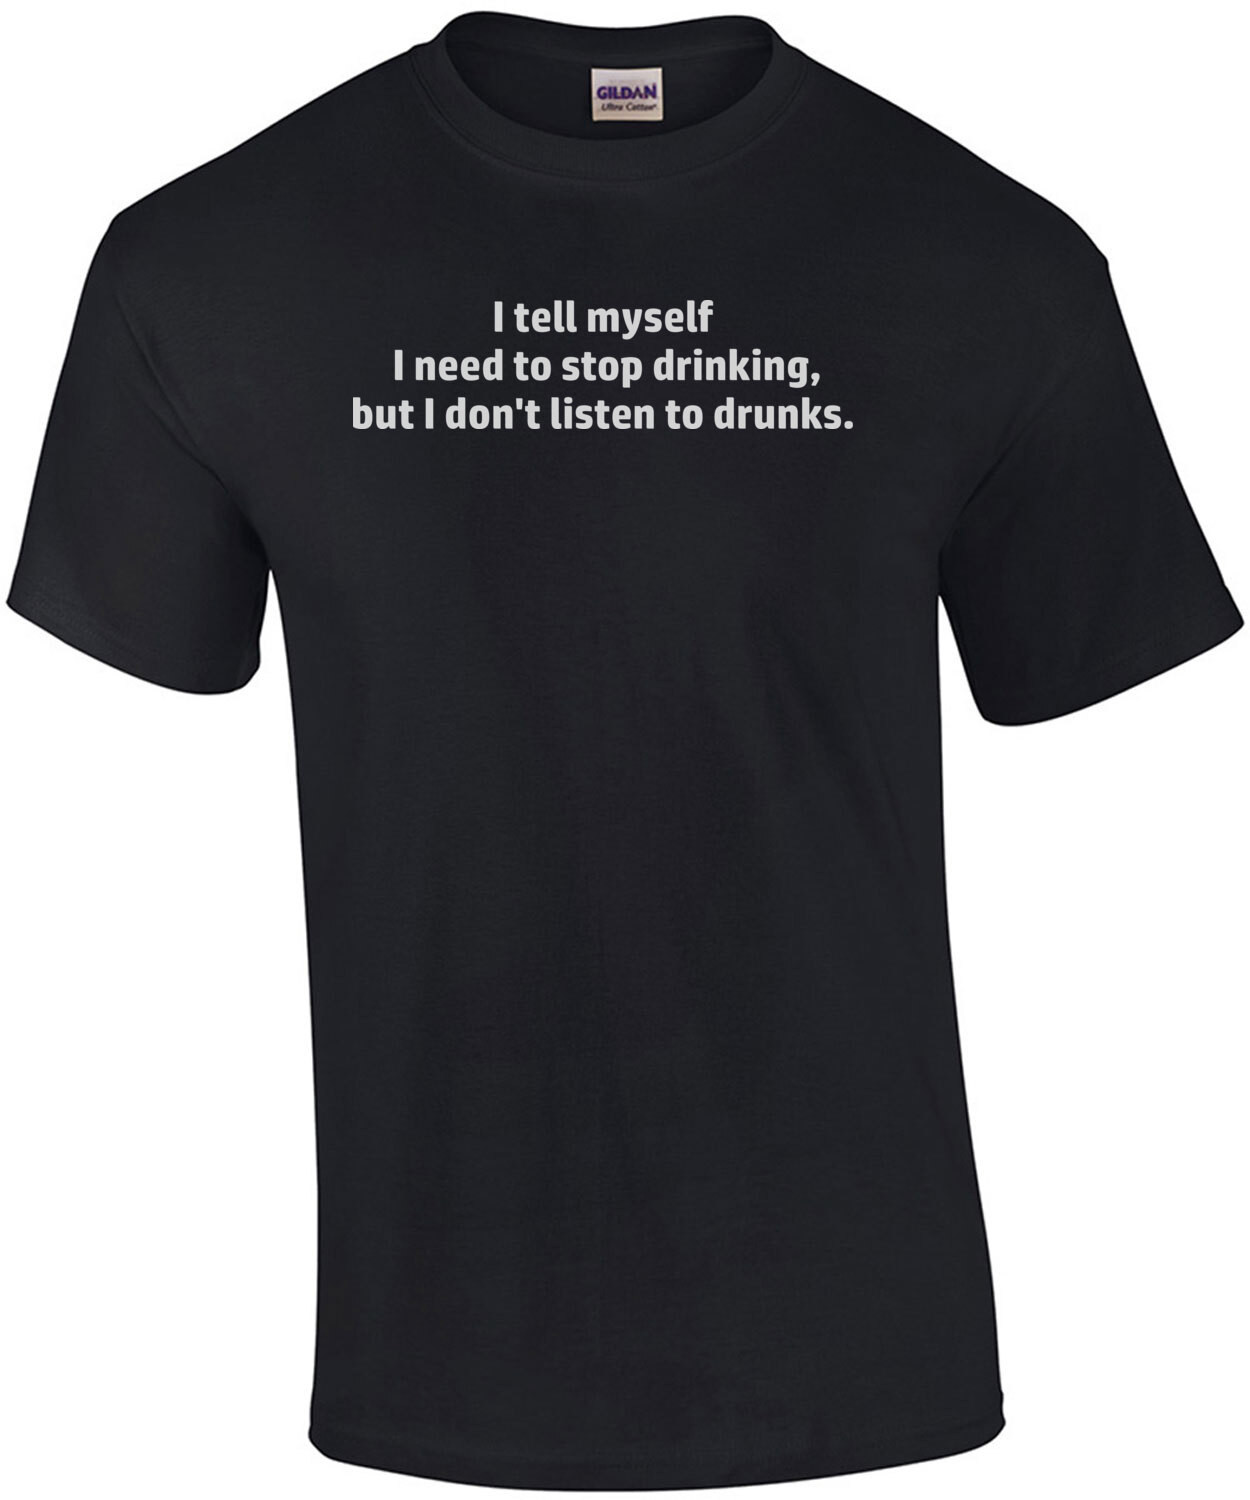 I tell myself I need to stop drinking, but I don't listen to drunks. Funny drinking t-shirt